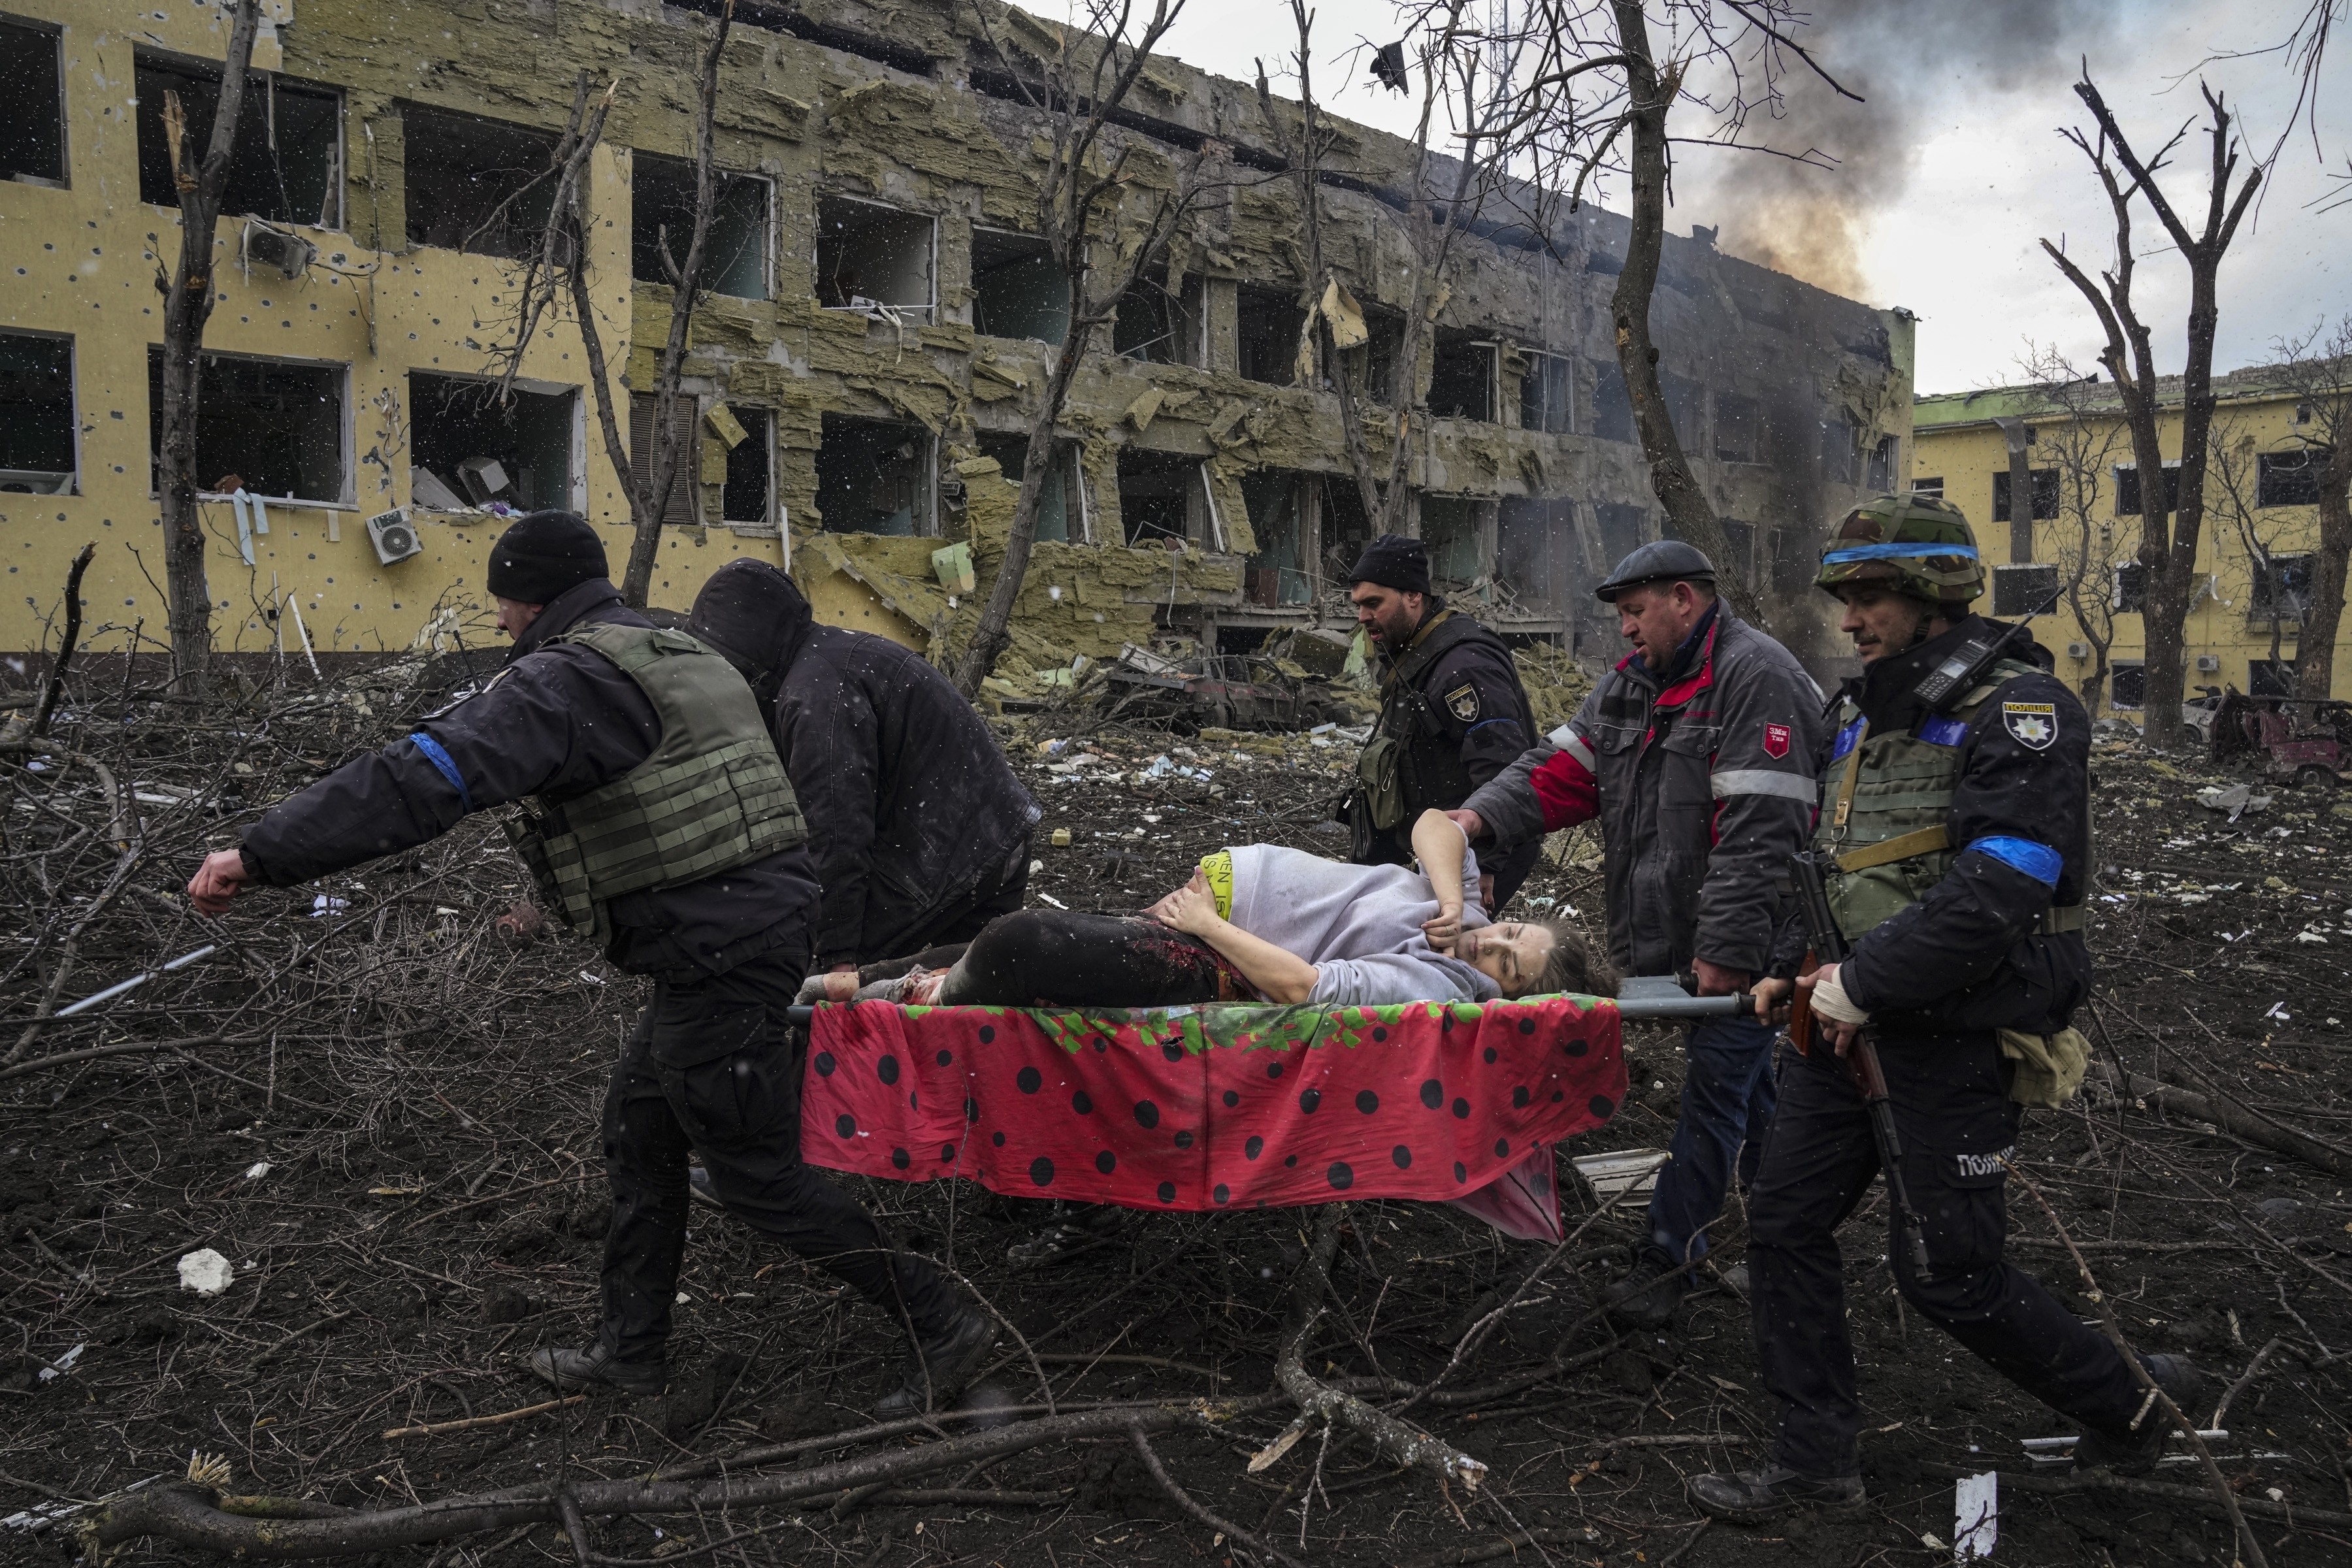 Ukrainian emergency employees and police officers evacuate an injured pregnant woman from a maternity hospital damaged by a Russian airstrike in Mariupol, Ukraine, March 9, 2022. Photo: AP